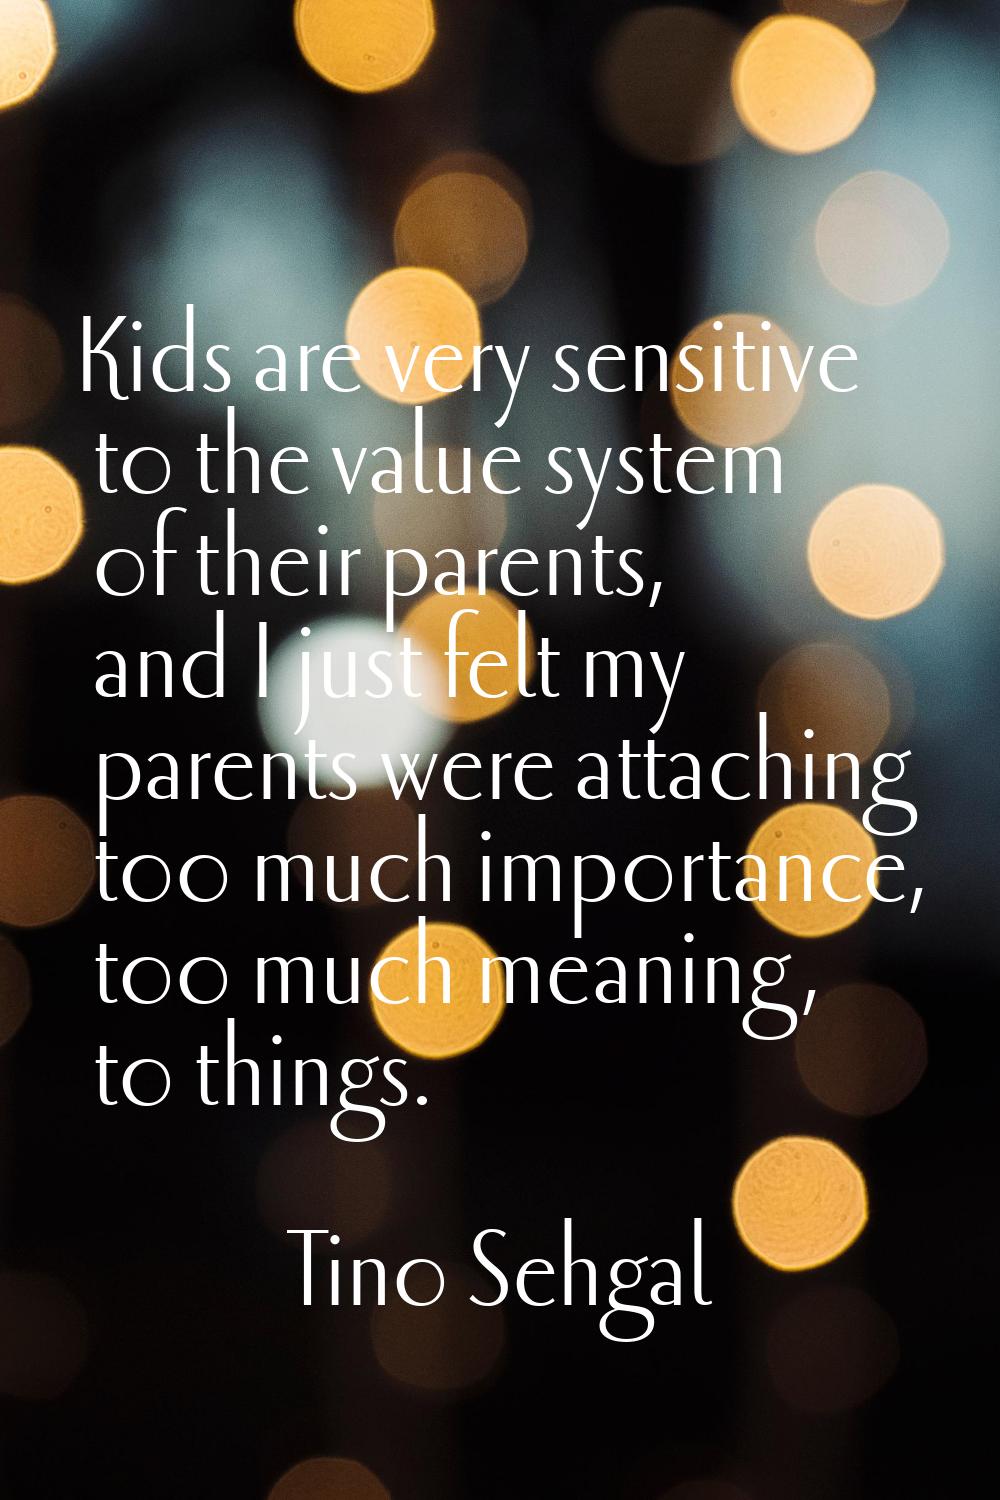 Kids are very sensitive to the value system of their parents, and I just felt my parents were attac